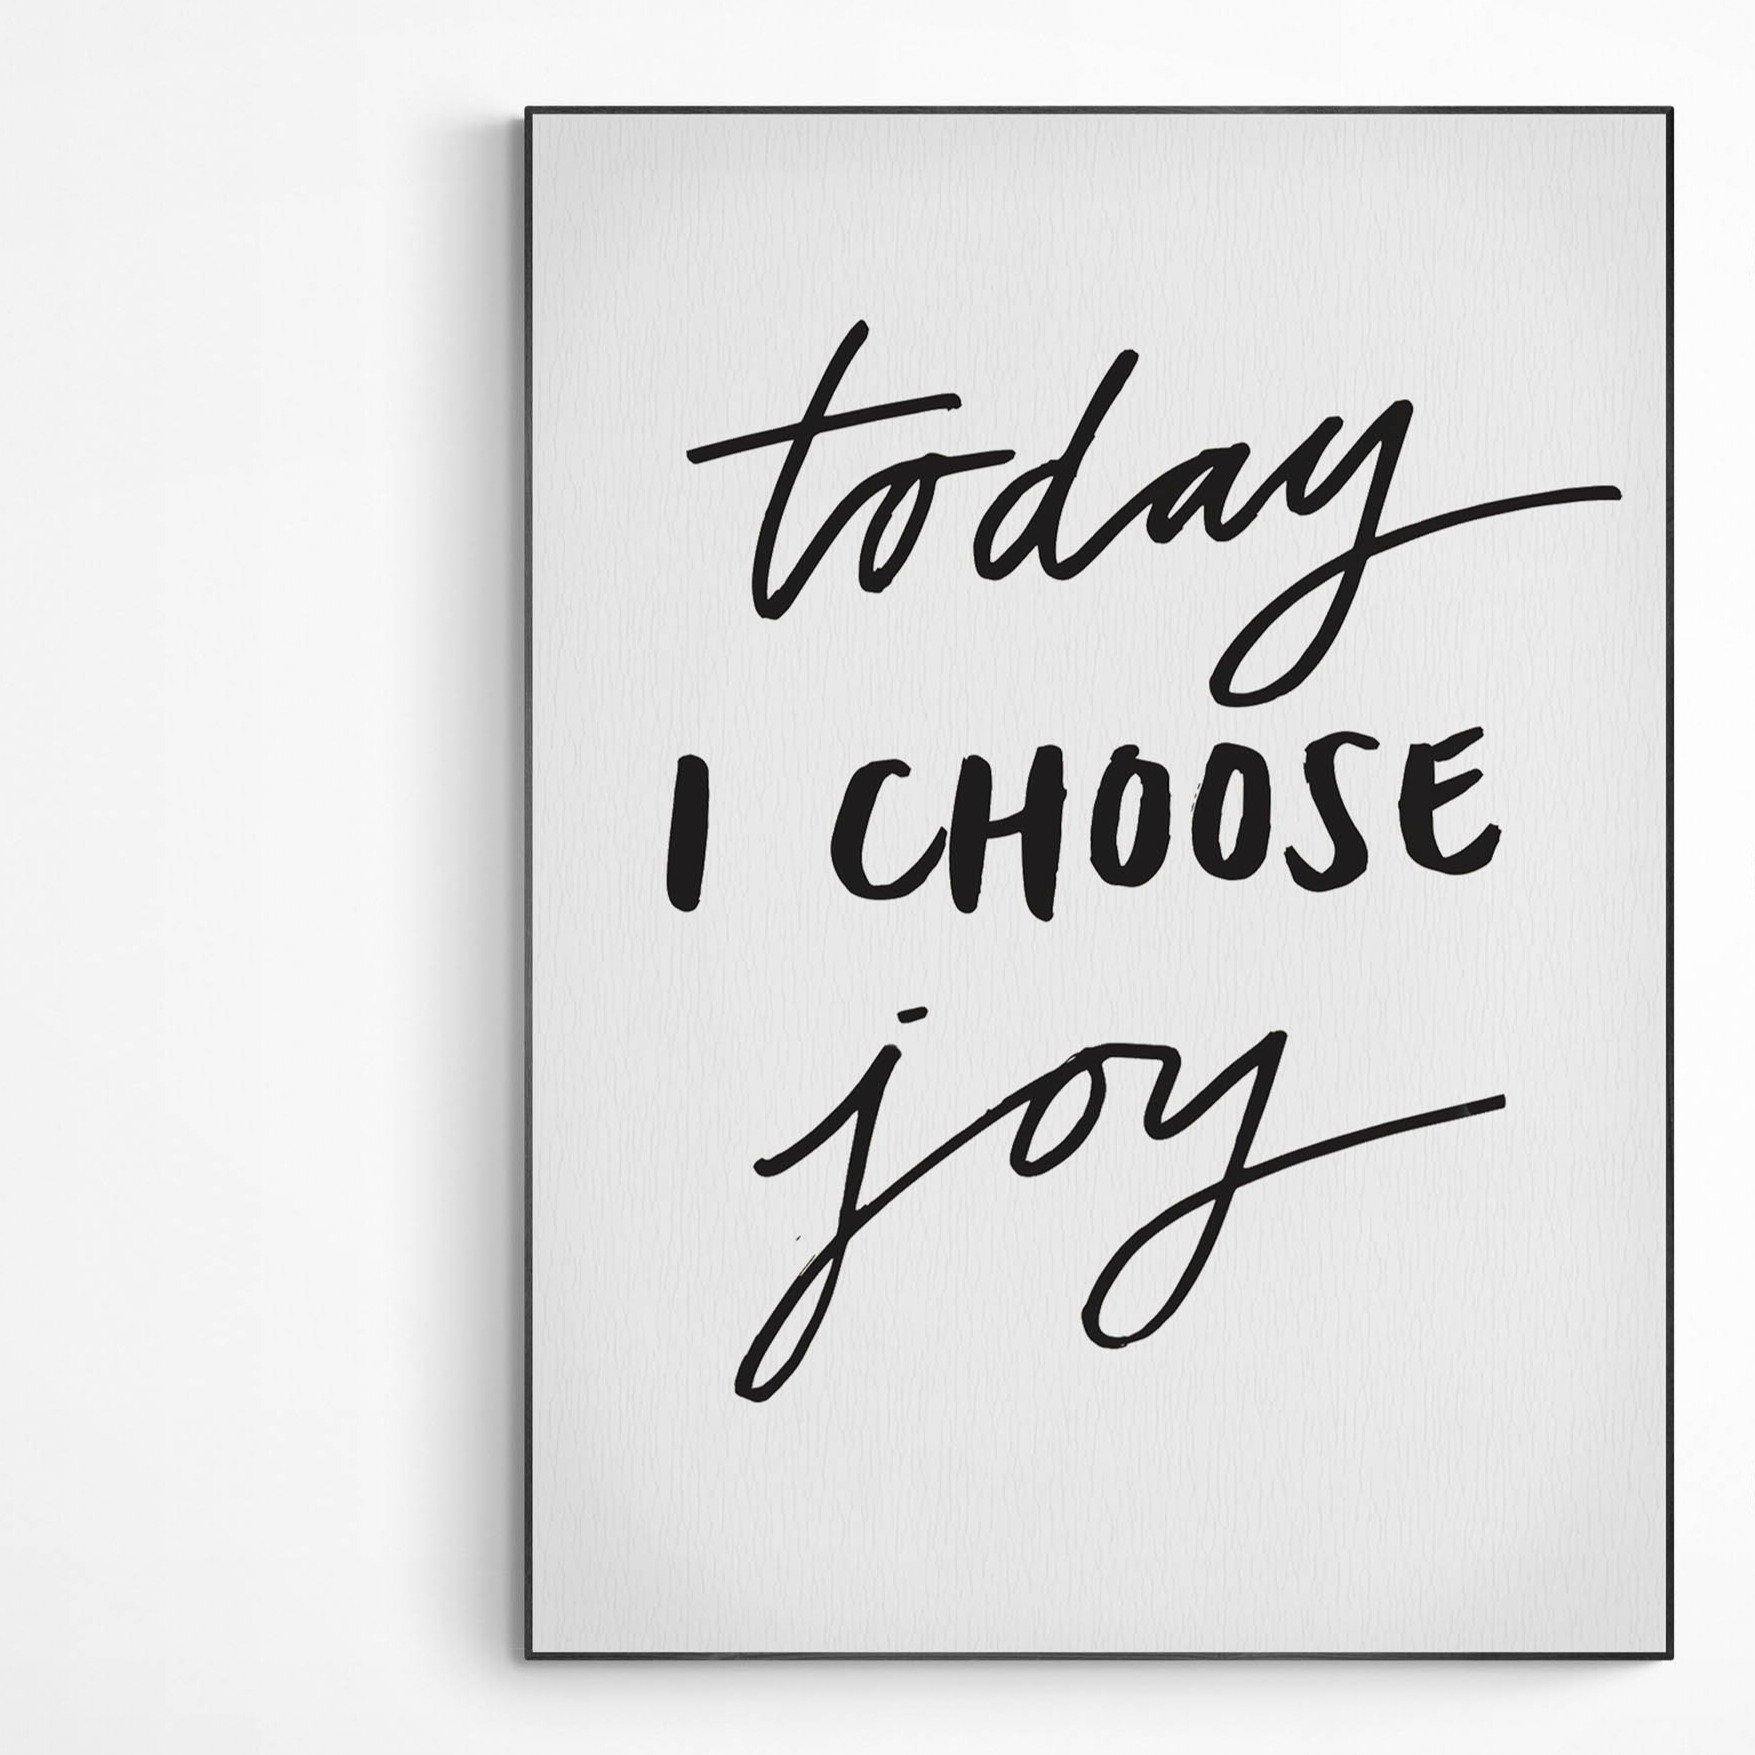 Today I Choose Joy Poster | Living Room Decor Print Art | Motivational Poster Wall Art Decor | Greeting Card Gifts | Variety Sizes